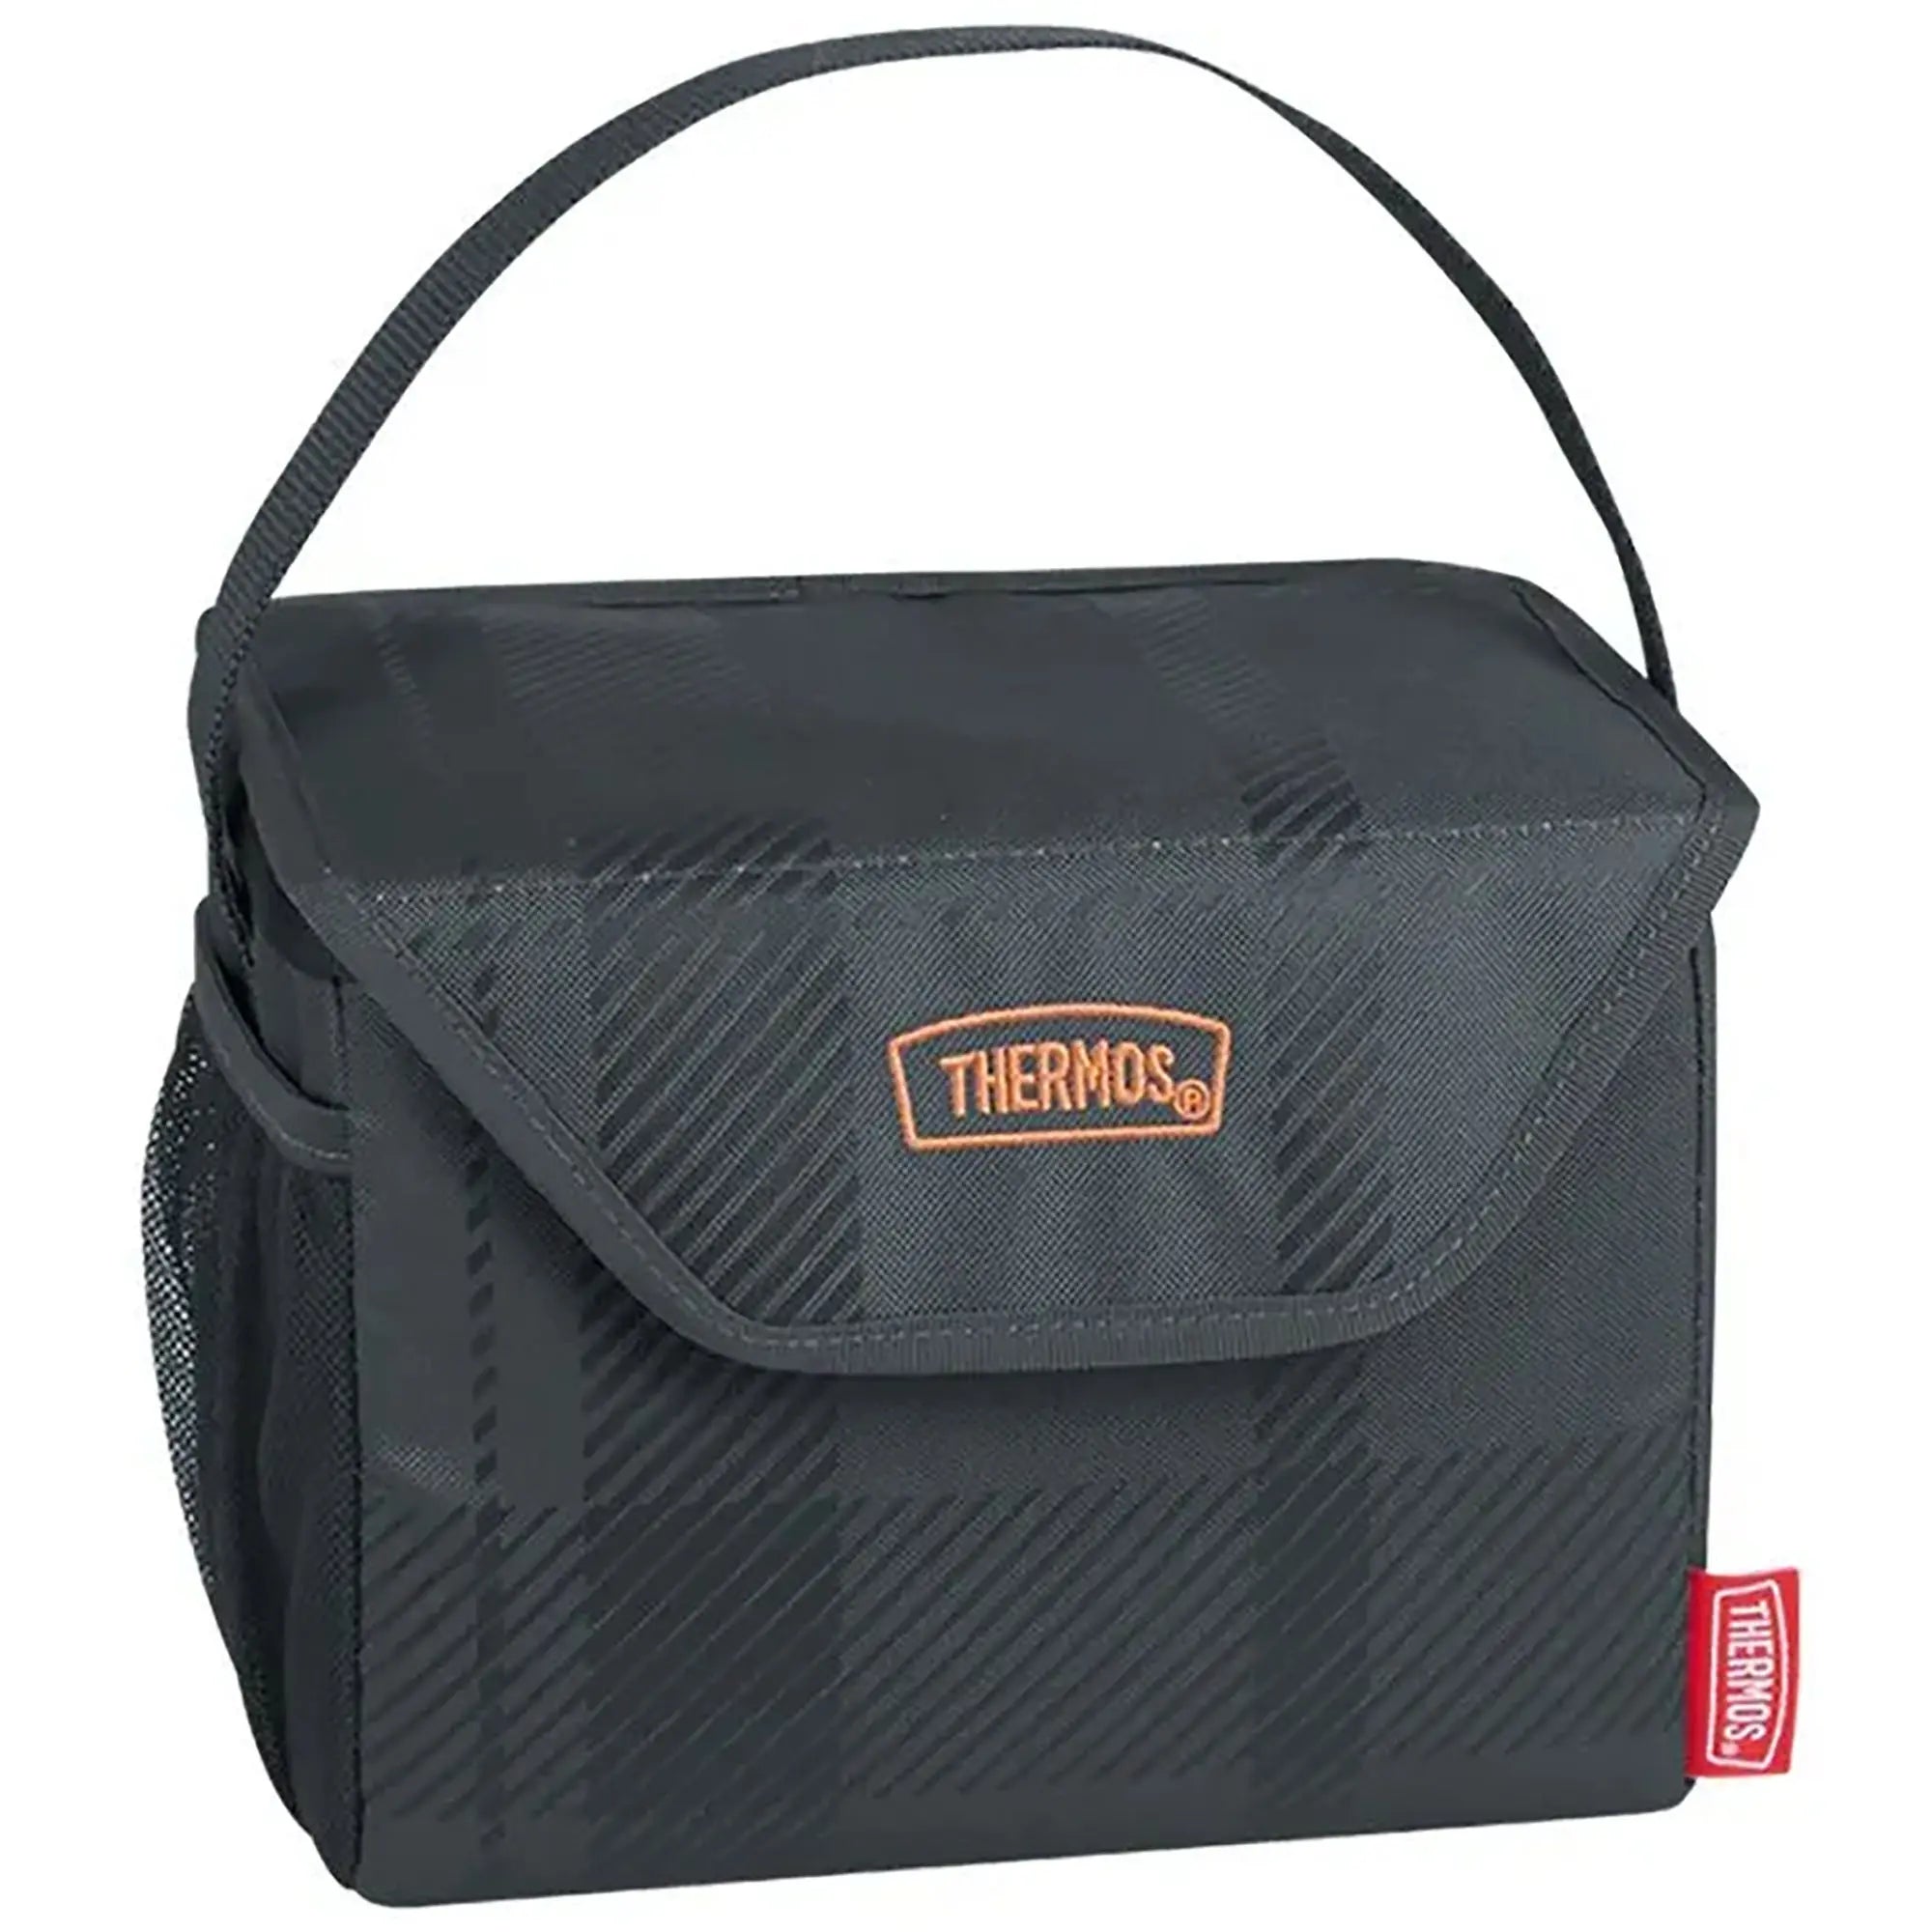 Thermos 6-Can Soft Cooler Bag - Charcoal Plaid Thermos